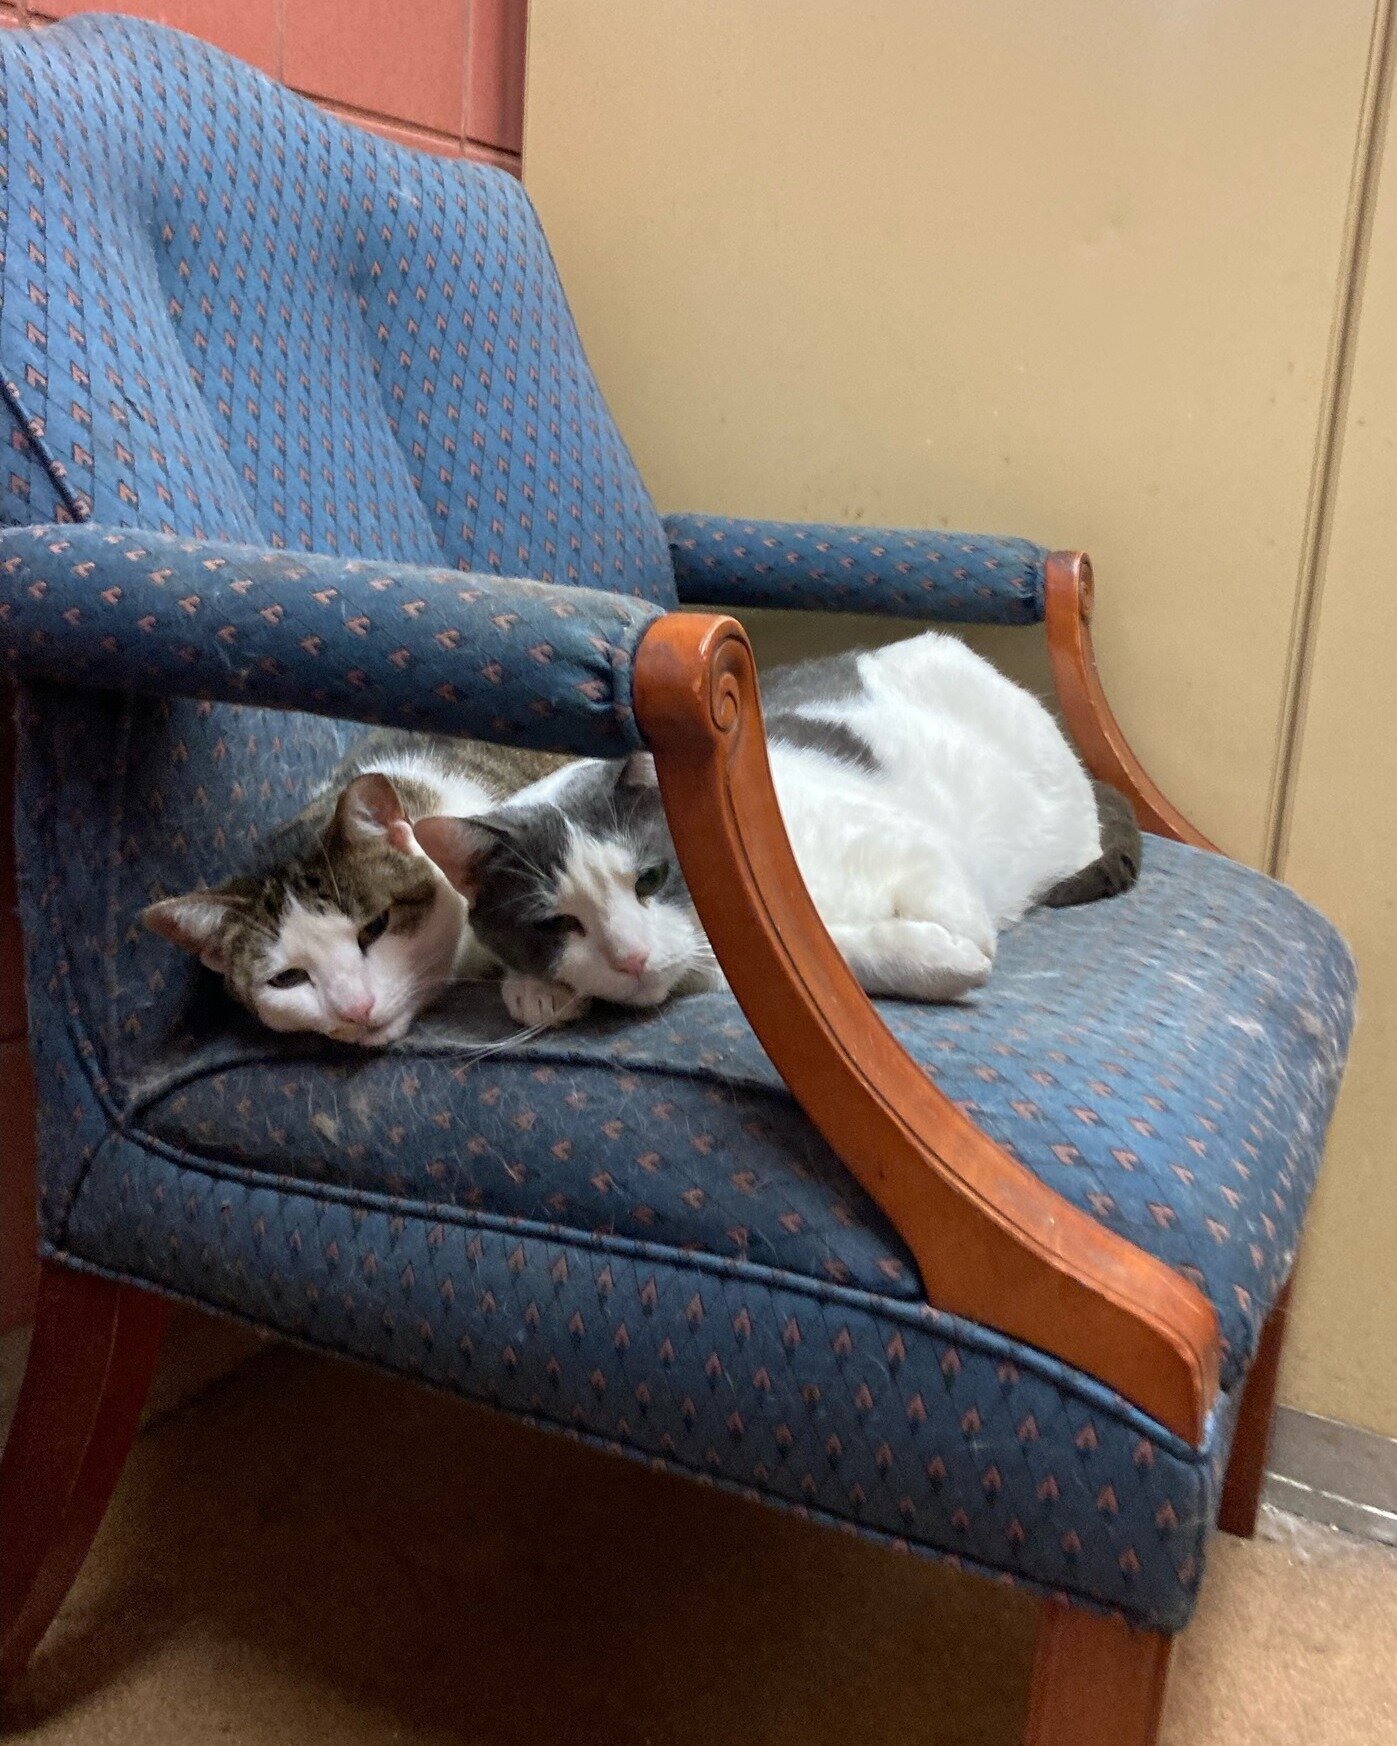 When you find your coworkers sleeping on the job 🙀 #awkward. All joking aside, our cats get plenty of naptimes, and our human employees get benefits like a living wage, PTO and healthcare. When you compost with us, you're not just supporting a healt